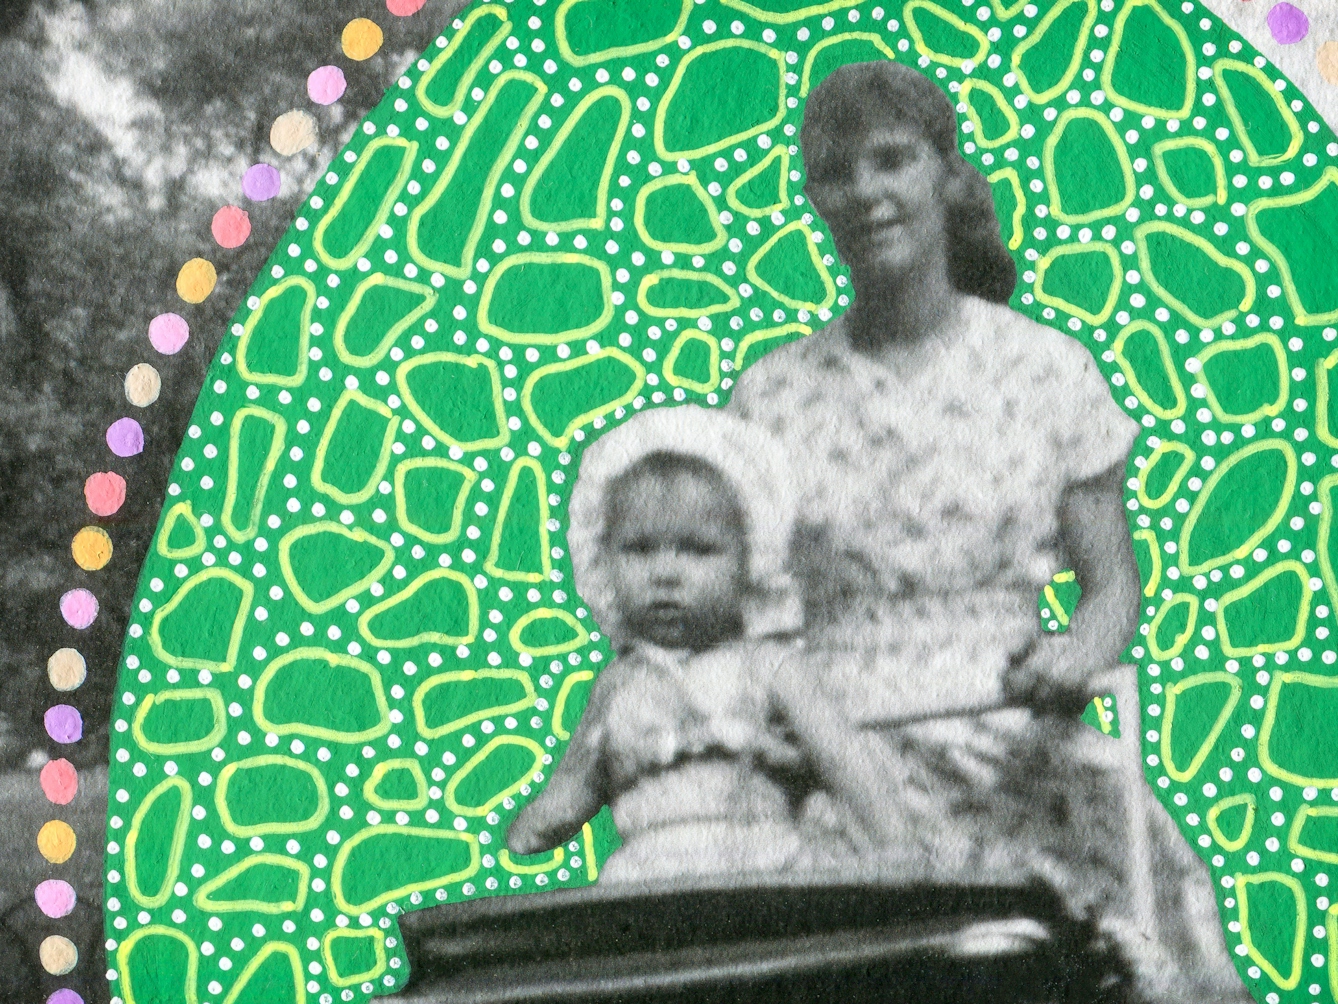 Artwork created by painting over the surface of a black and white photographic print with colourful paint. The artwork shows the original scene of a young woman walking through a parkland scene pushing a pram. Sitting up inside the pram is a young toddler facing forwards. The woman, toddler and pram are surrounded by a large oval shape painted green, which is covered in small lighter green dots and many organic shaped circular light green outlines. Around the edge of the oval shape are a line of coloured painted spots, of yellow, pink and purple. The texture of the paint can be seen on the surface of the print.